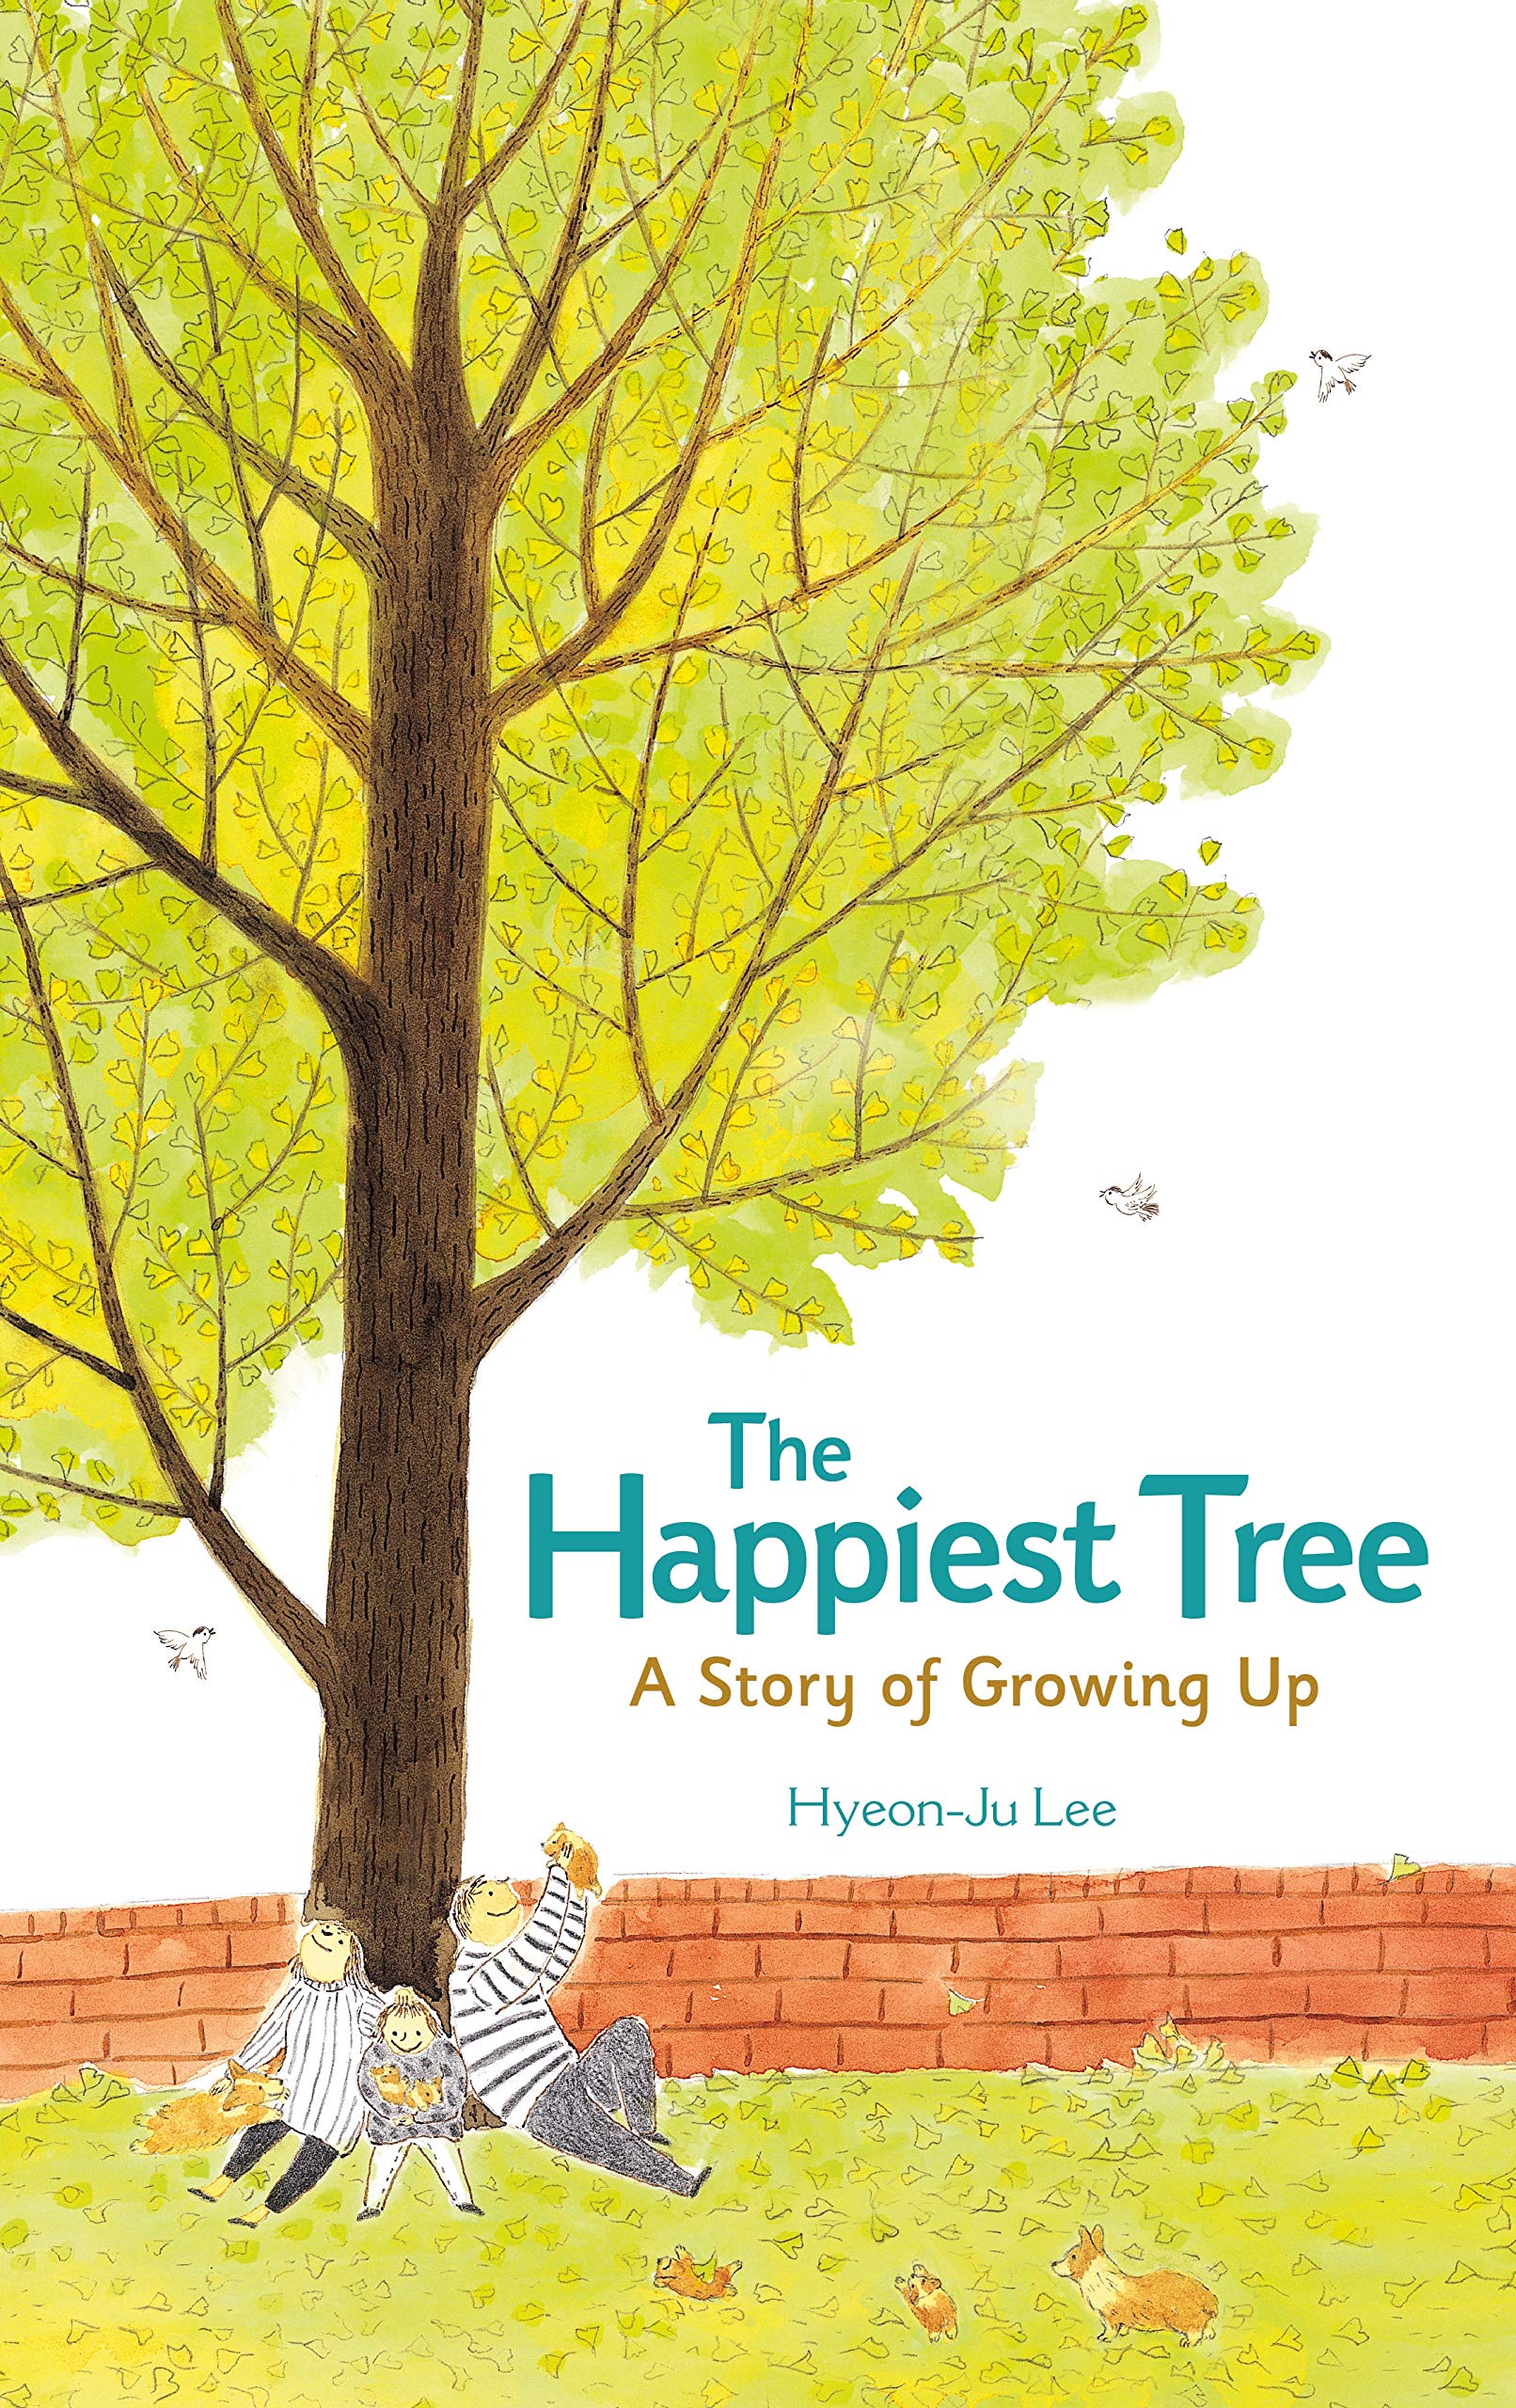 Hyeon-Ju Lee, The Happiest Tree: A Story of Growing Up, Feiwel & Friends